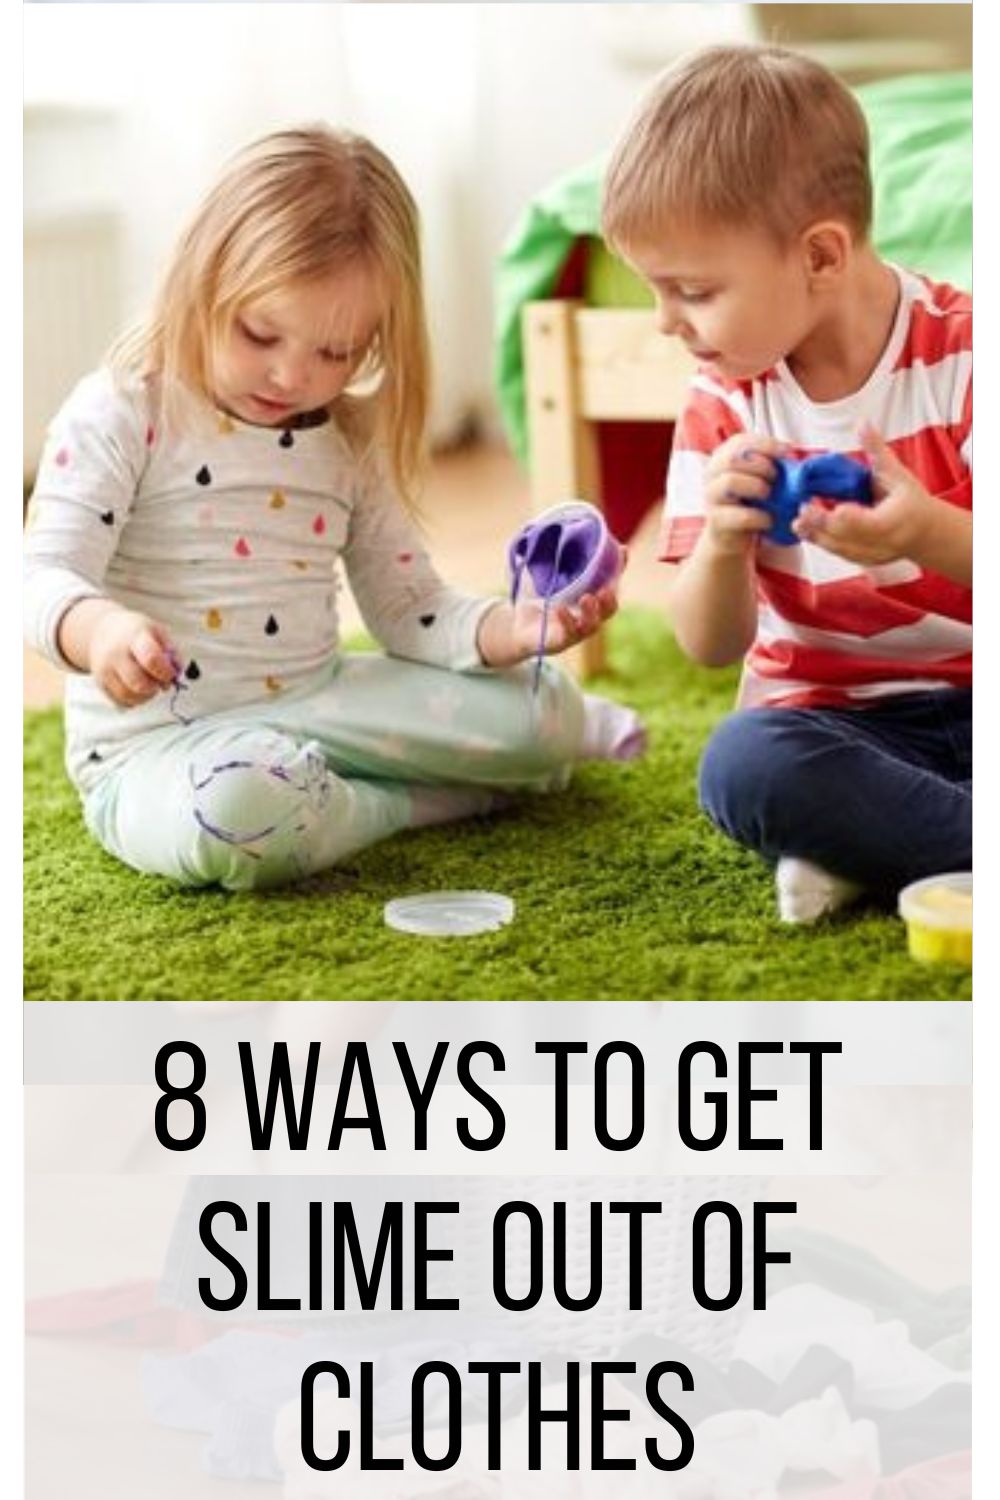 8 Ways to Get Slime Out of Clothes